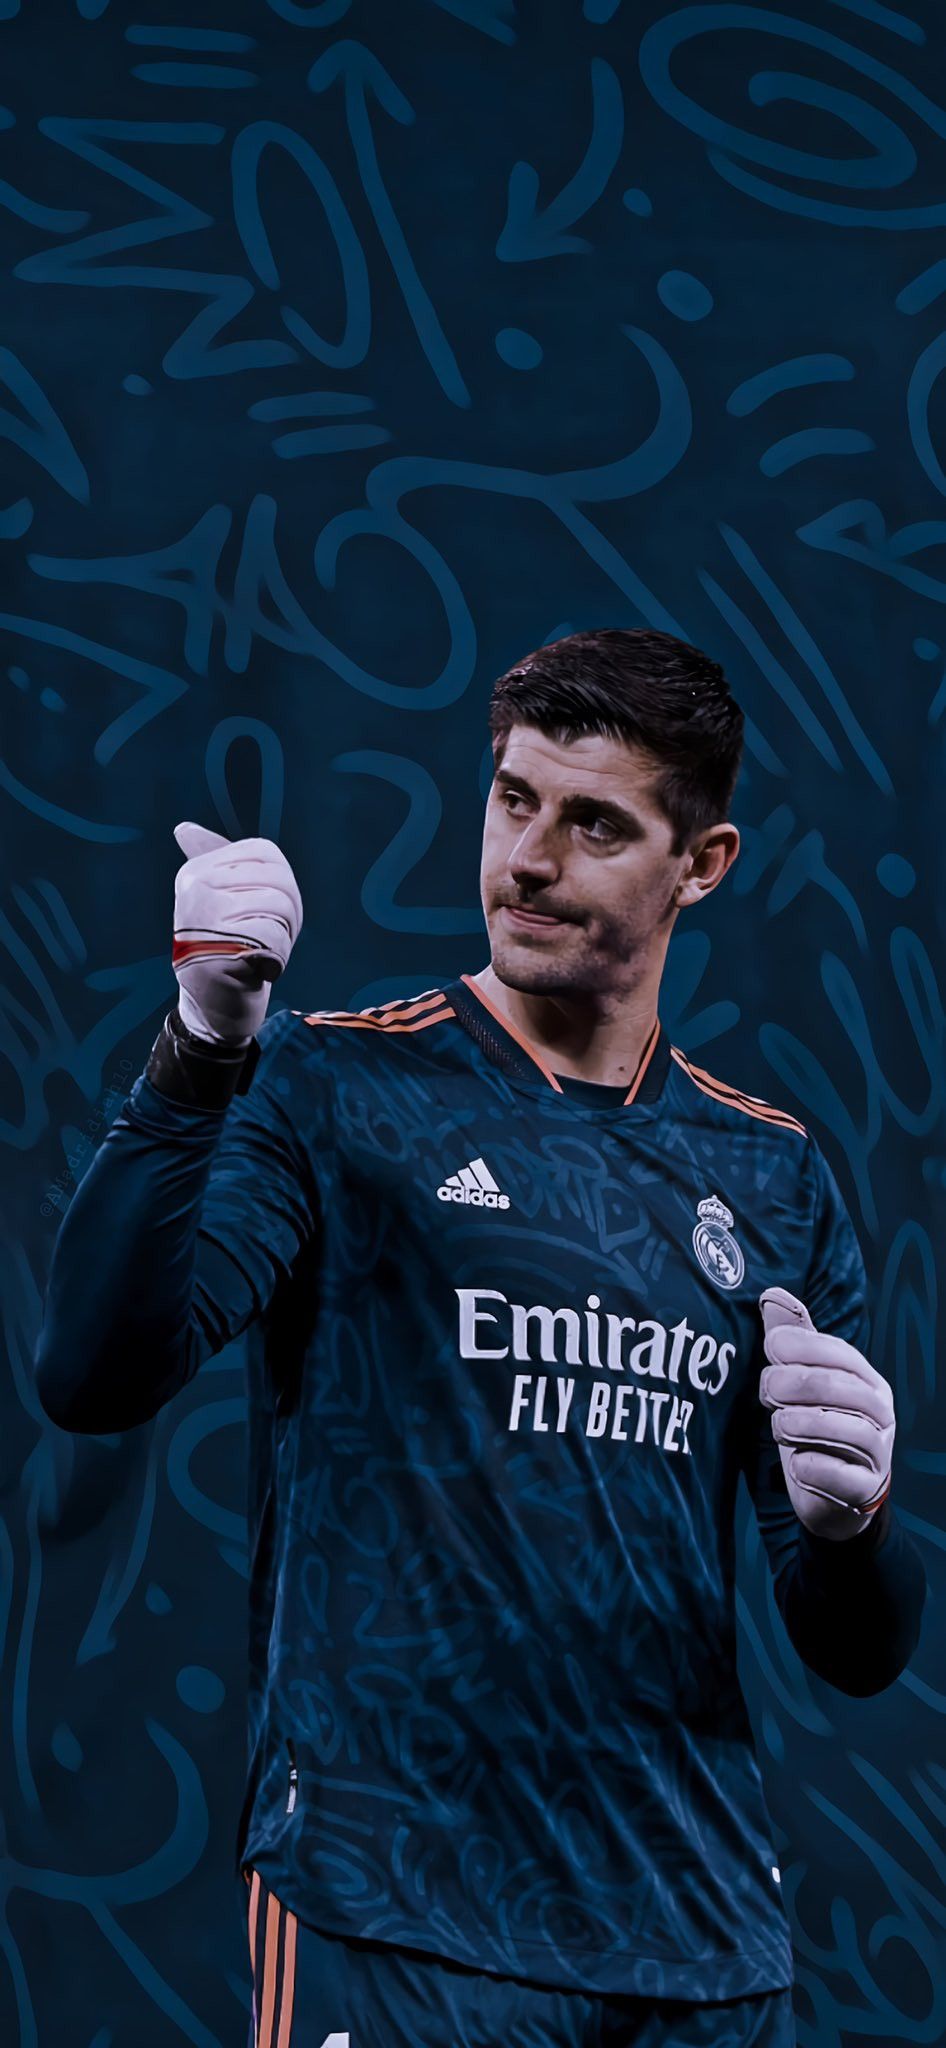 Courtois wallpaper. Courtois real madrid, Real madrid wallpaper, Real madrid players